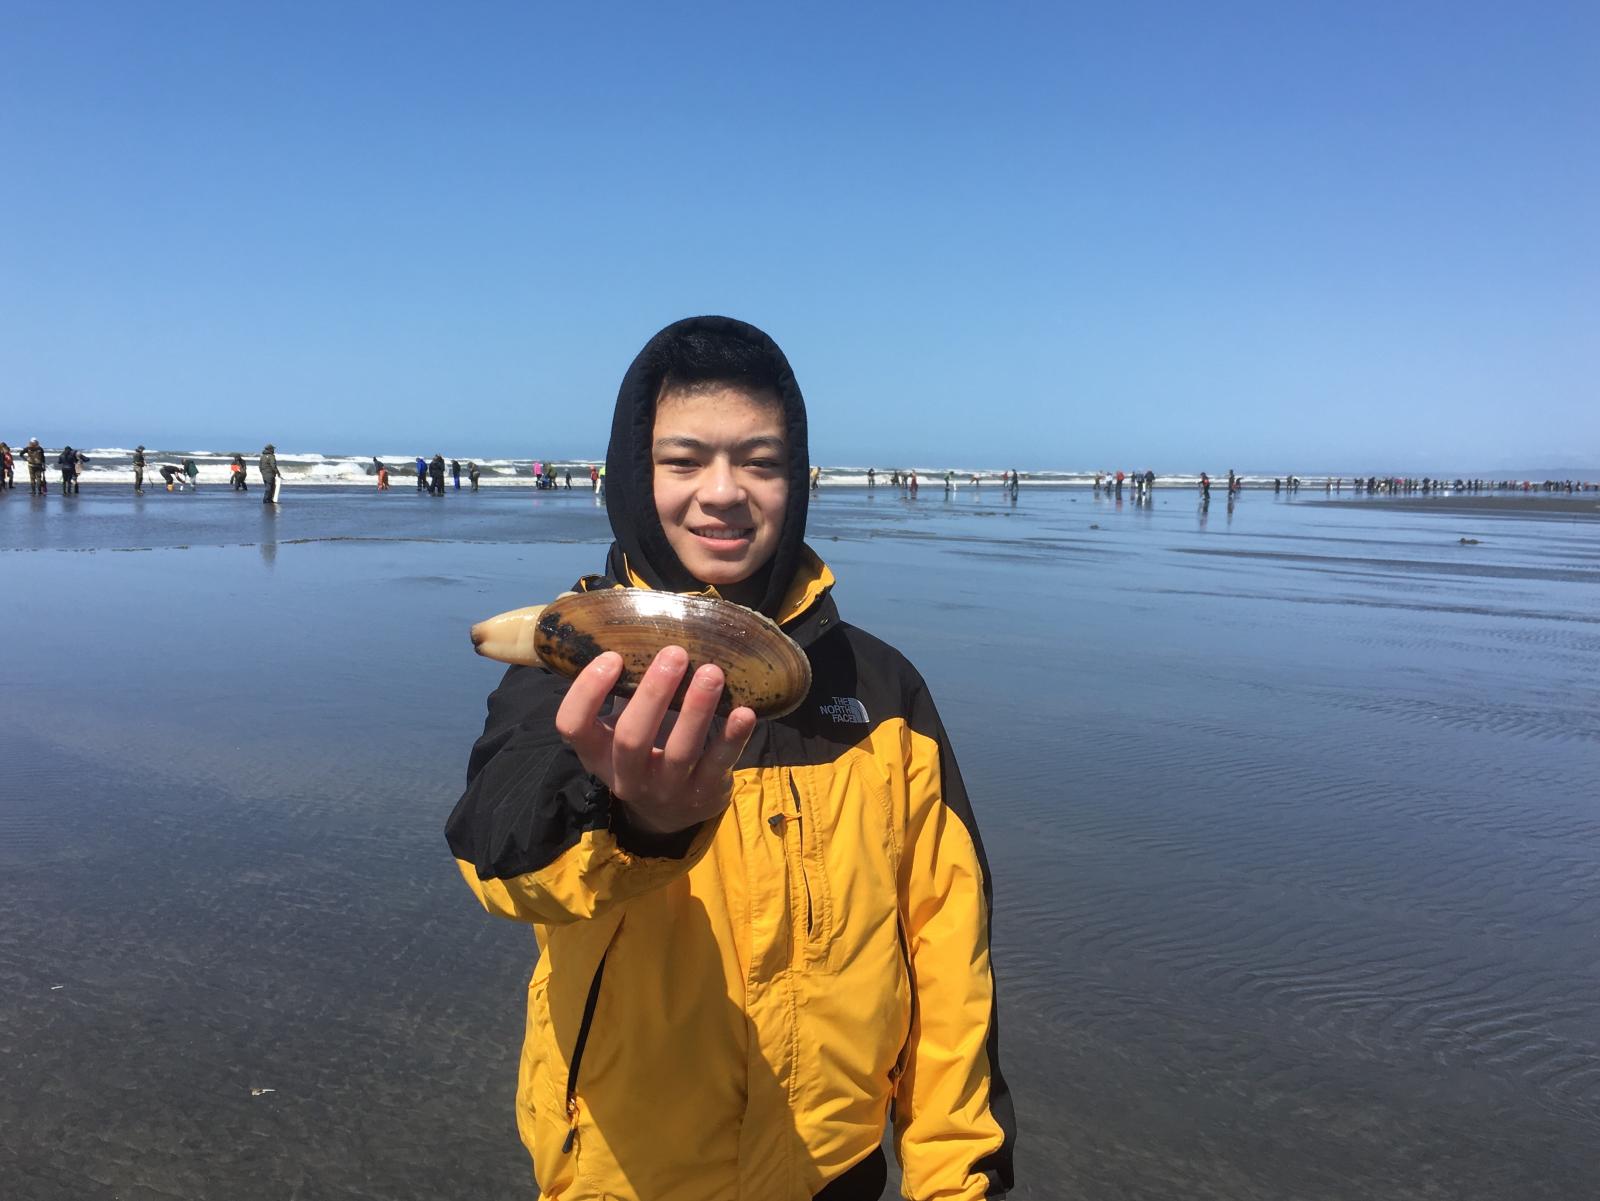 WDFW approves four days of coastal razor clam digs beginning Sept